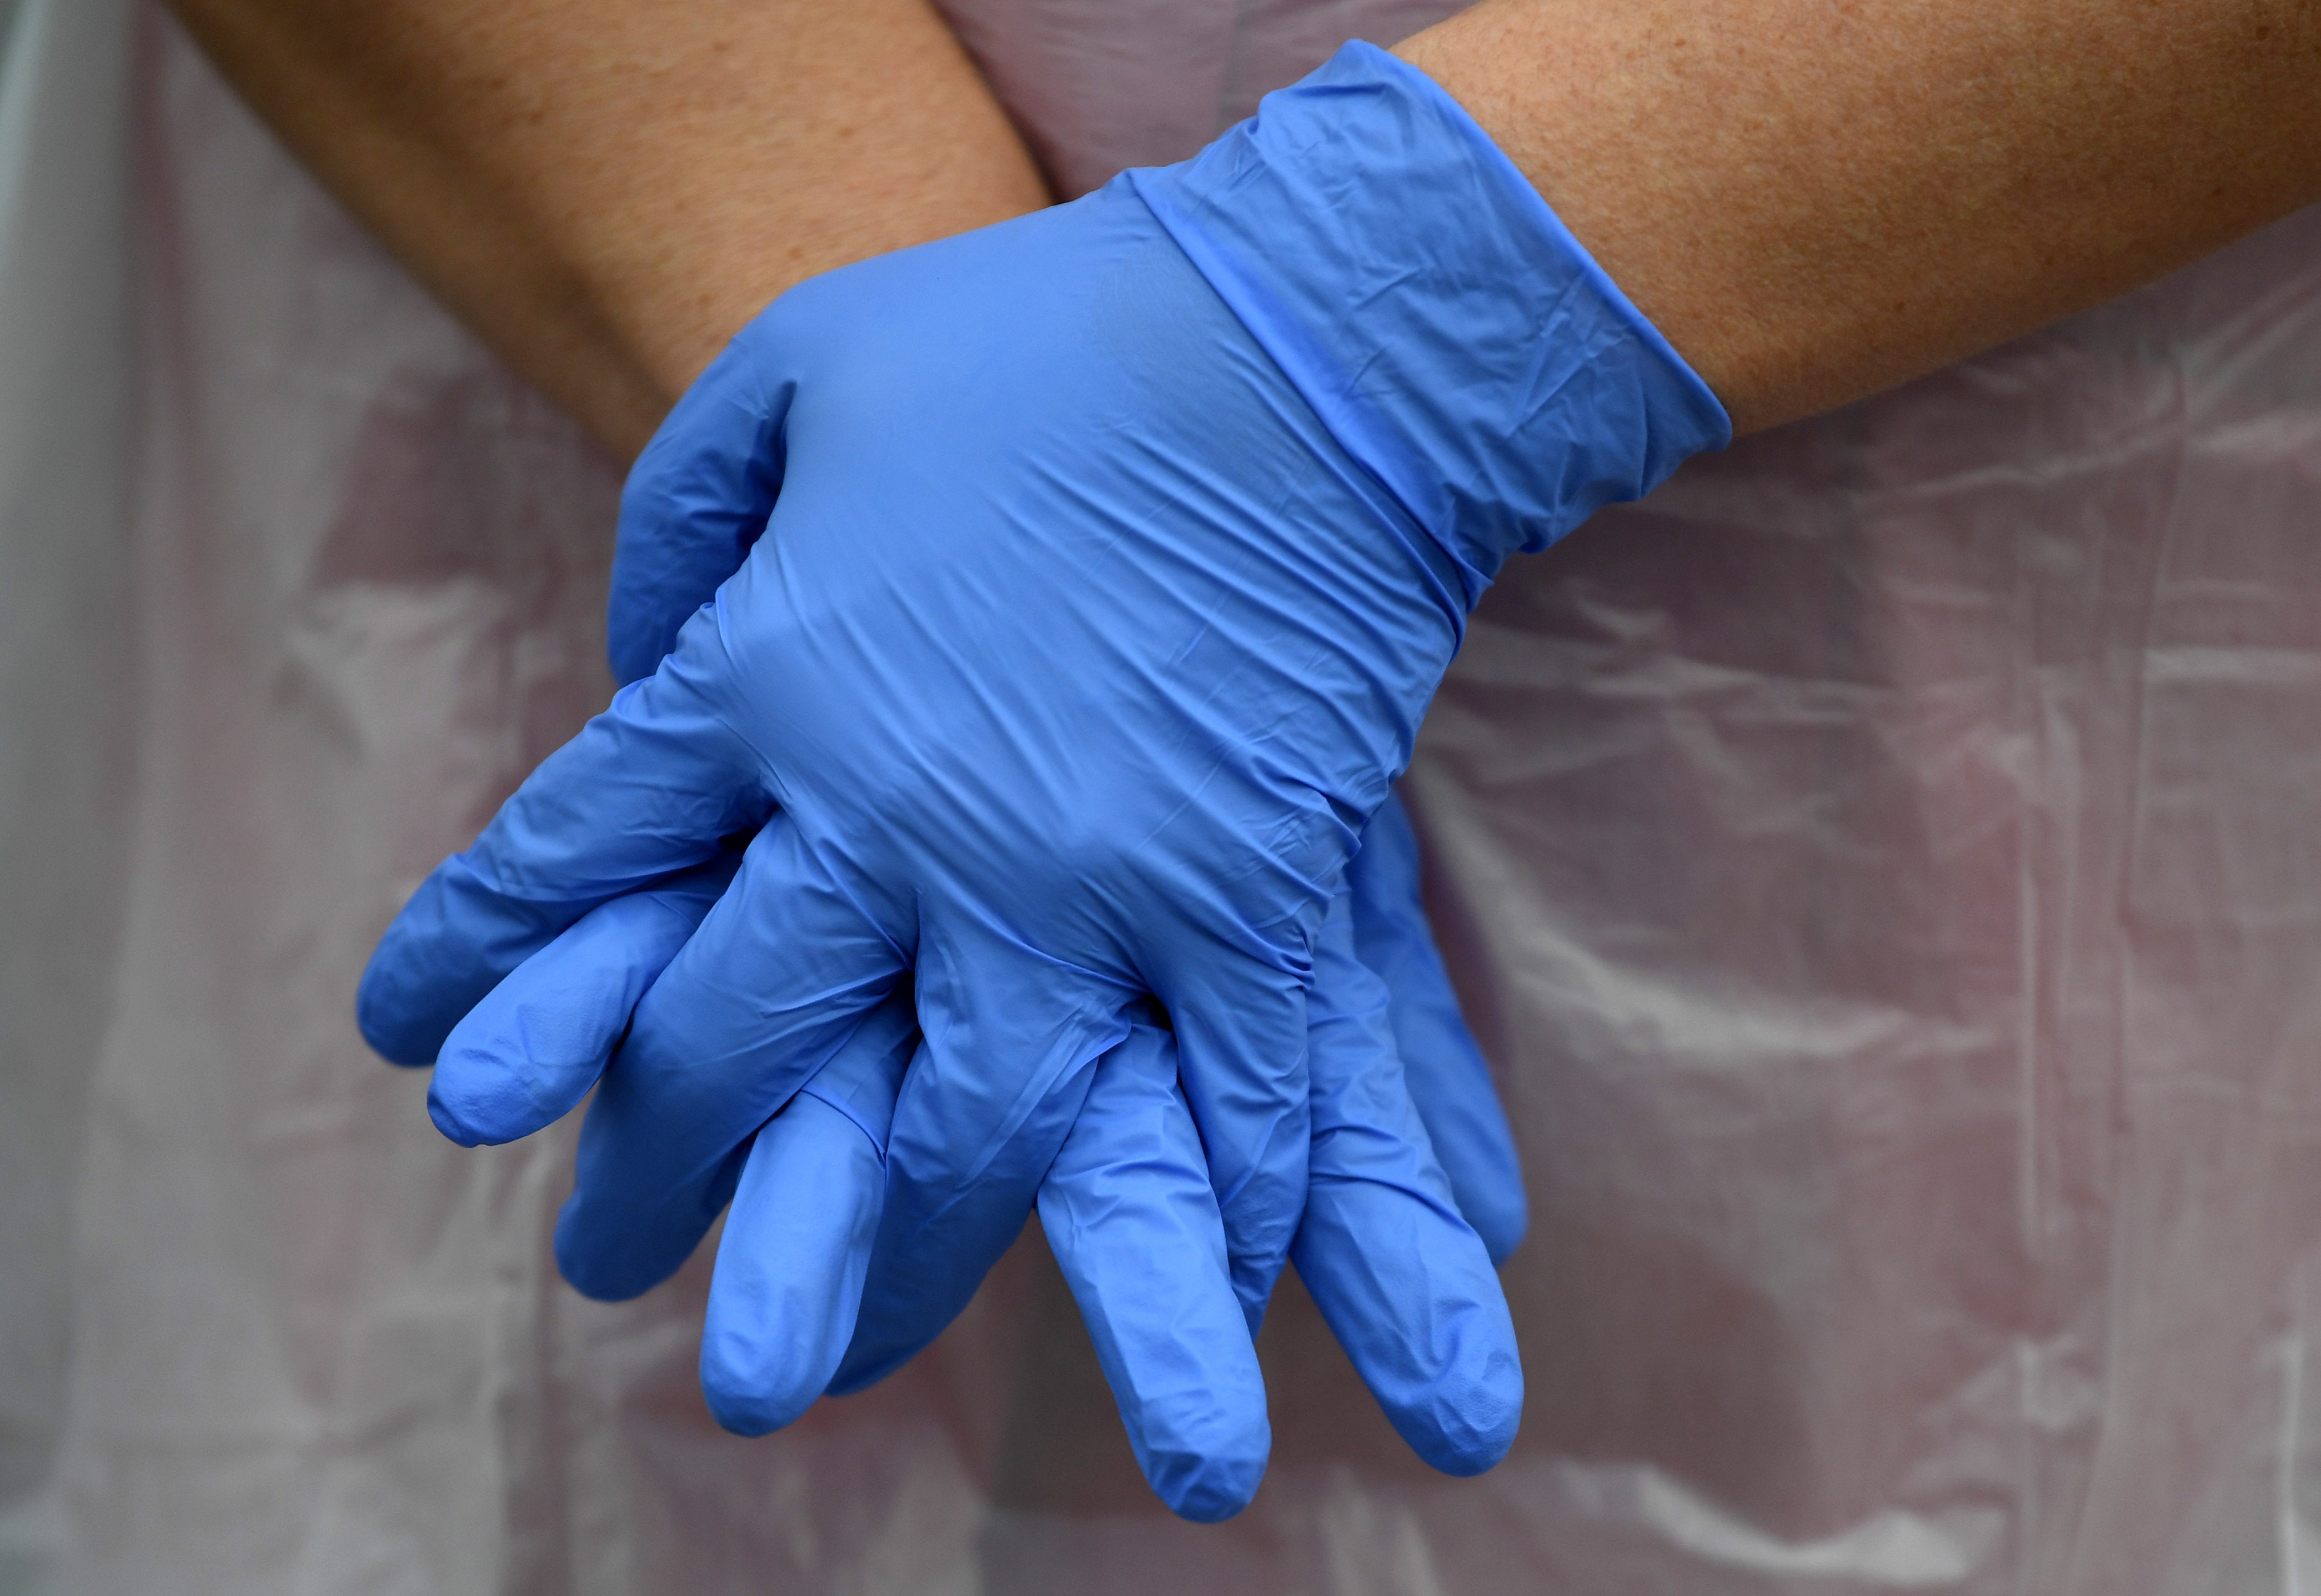 PPE will be available until March 31 2023 or until infection prevention control guidance is “withdrawn or significantly amended”, the Department for Health and Social Care (DHSC) said (PA)